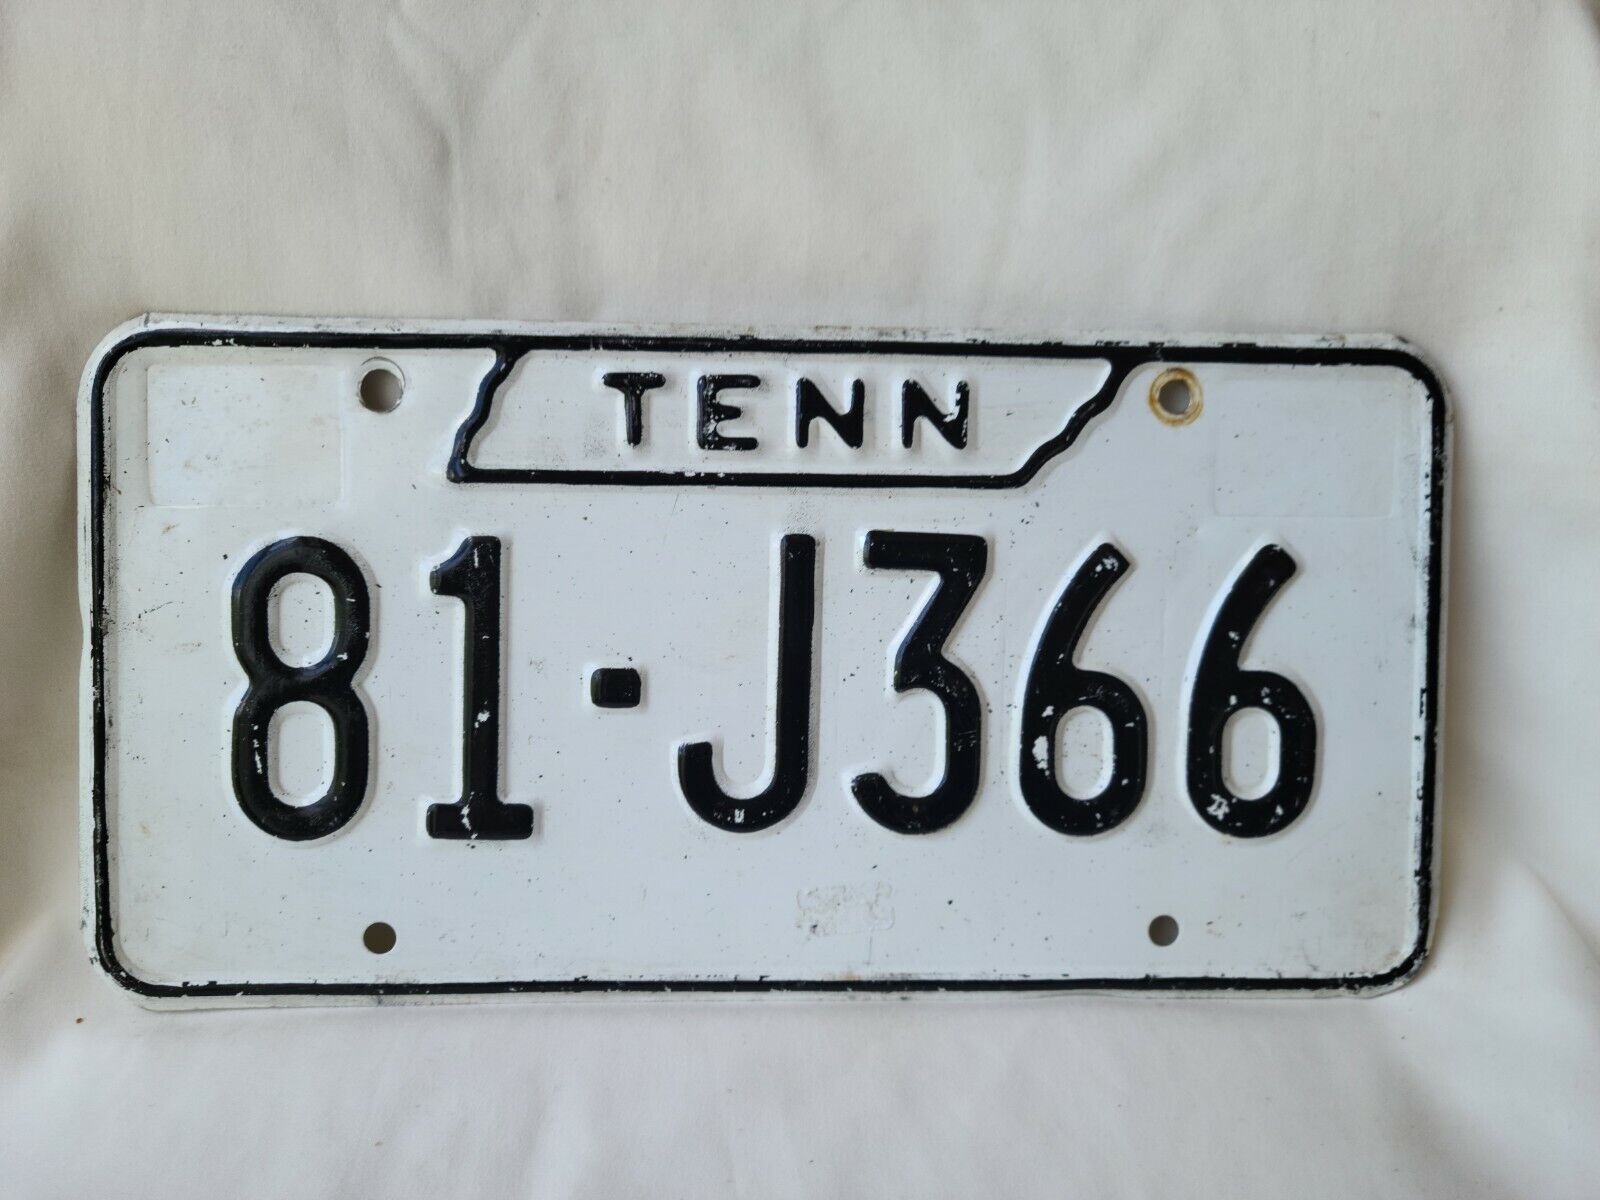  Vintage 1976 Tennessee Jackson County License Plate 0322